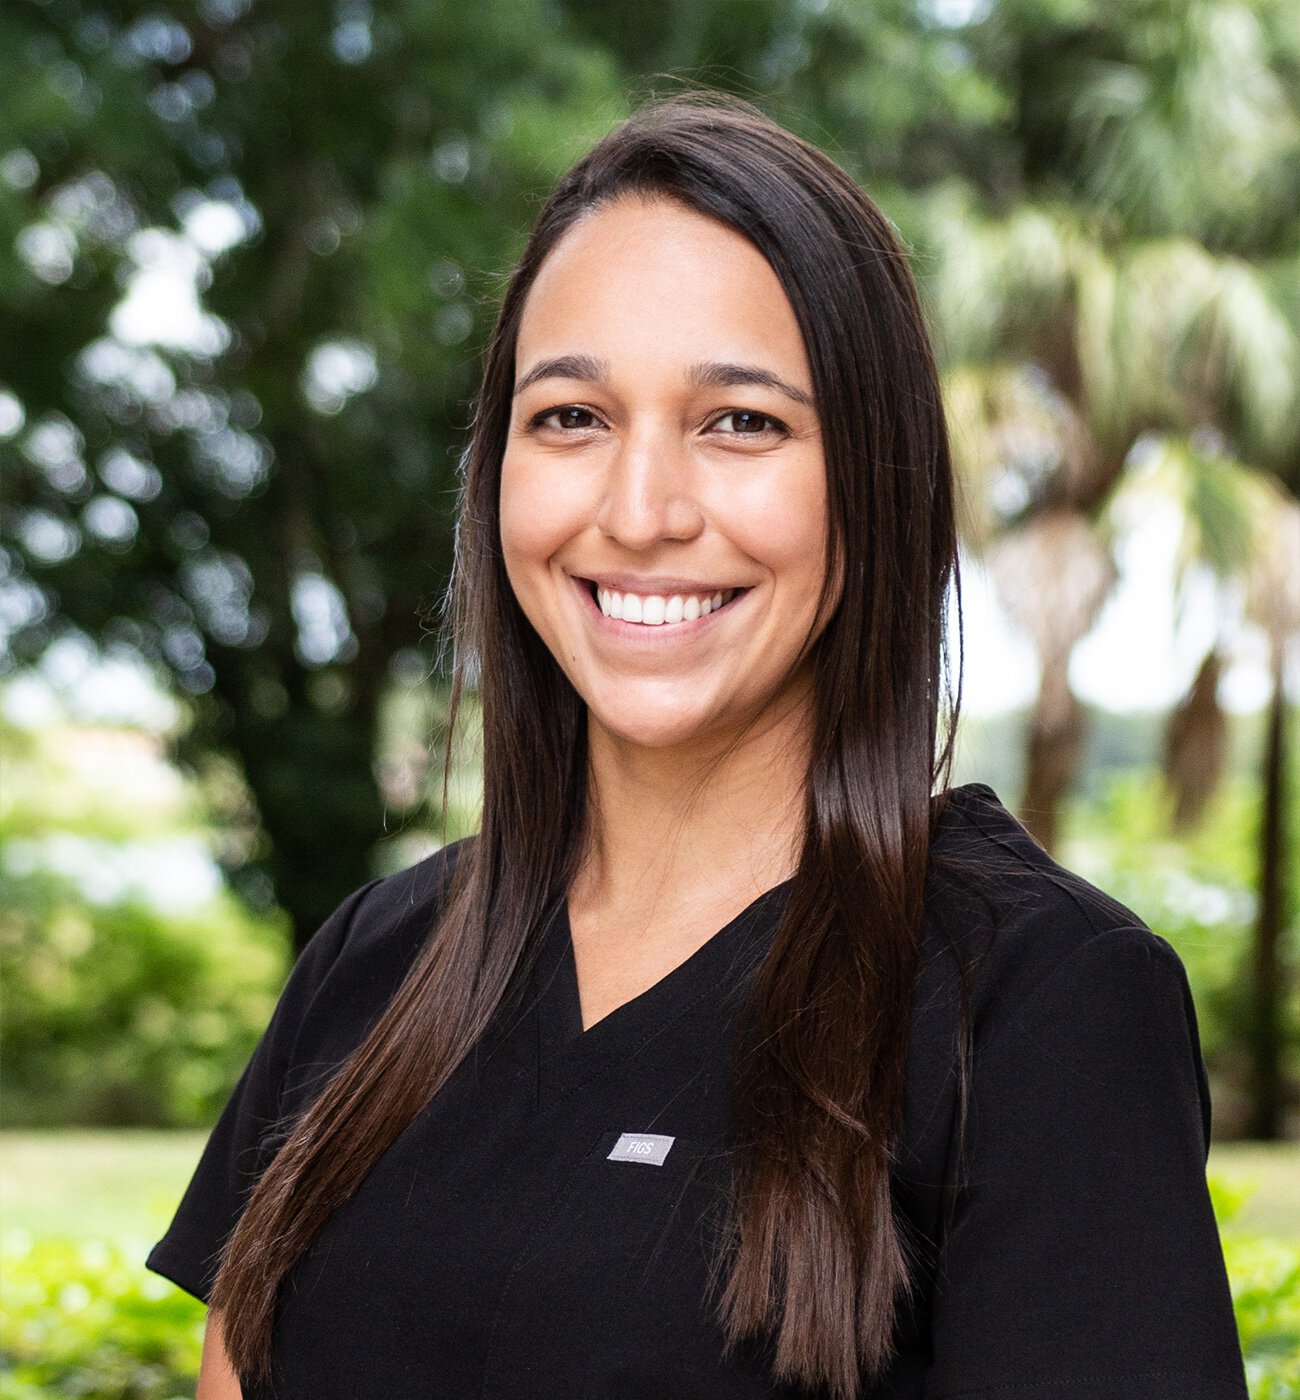 Broward ENT Physician Assistant Karlin Campos